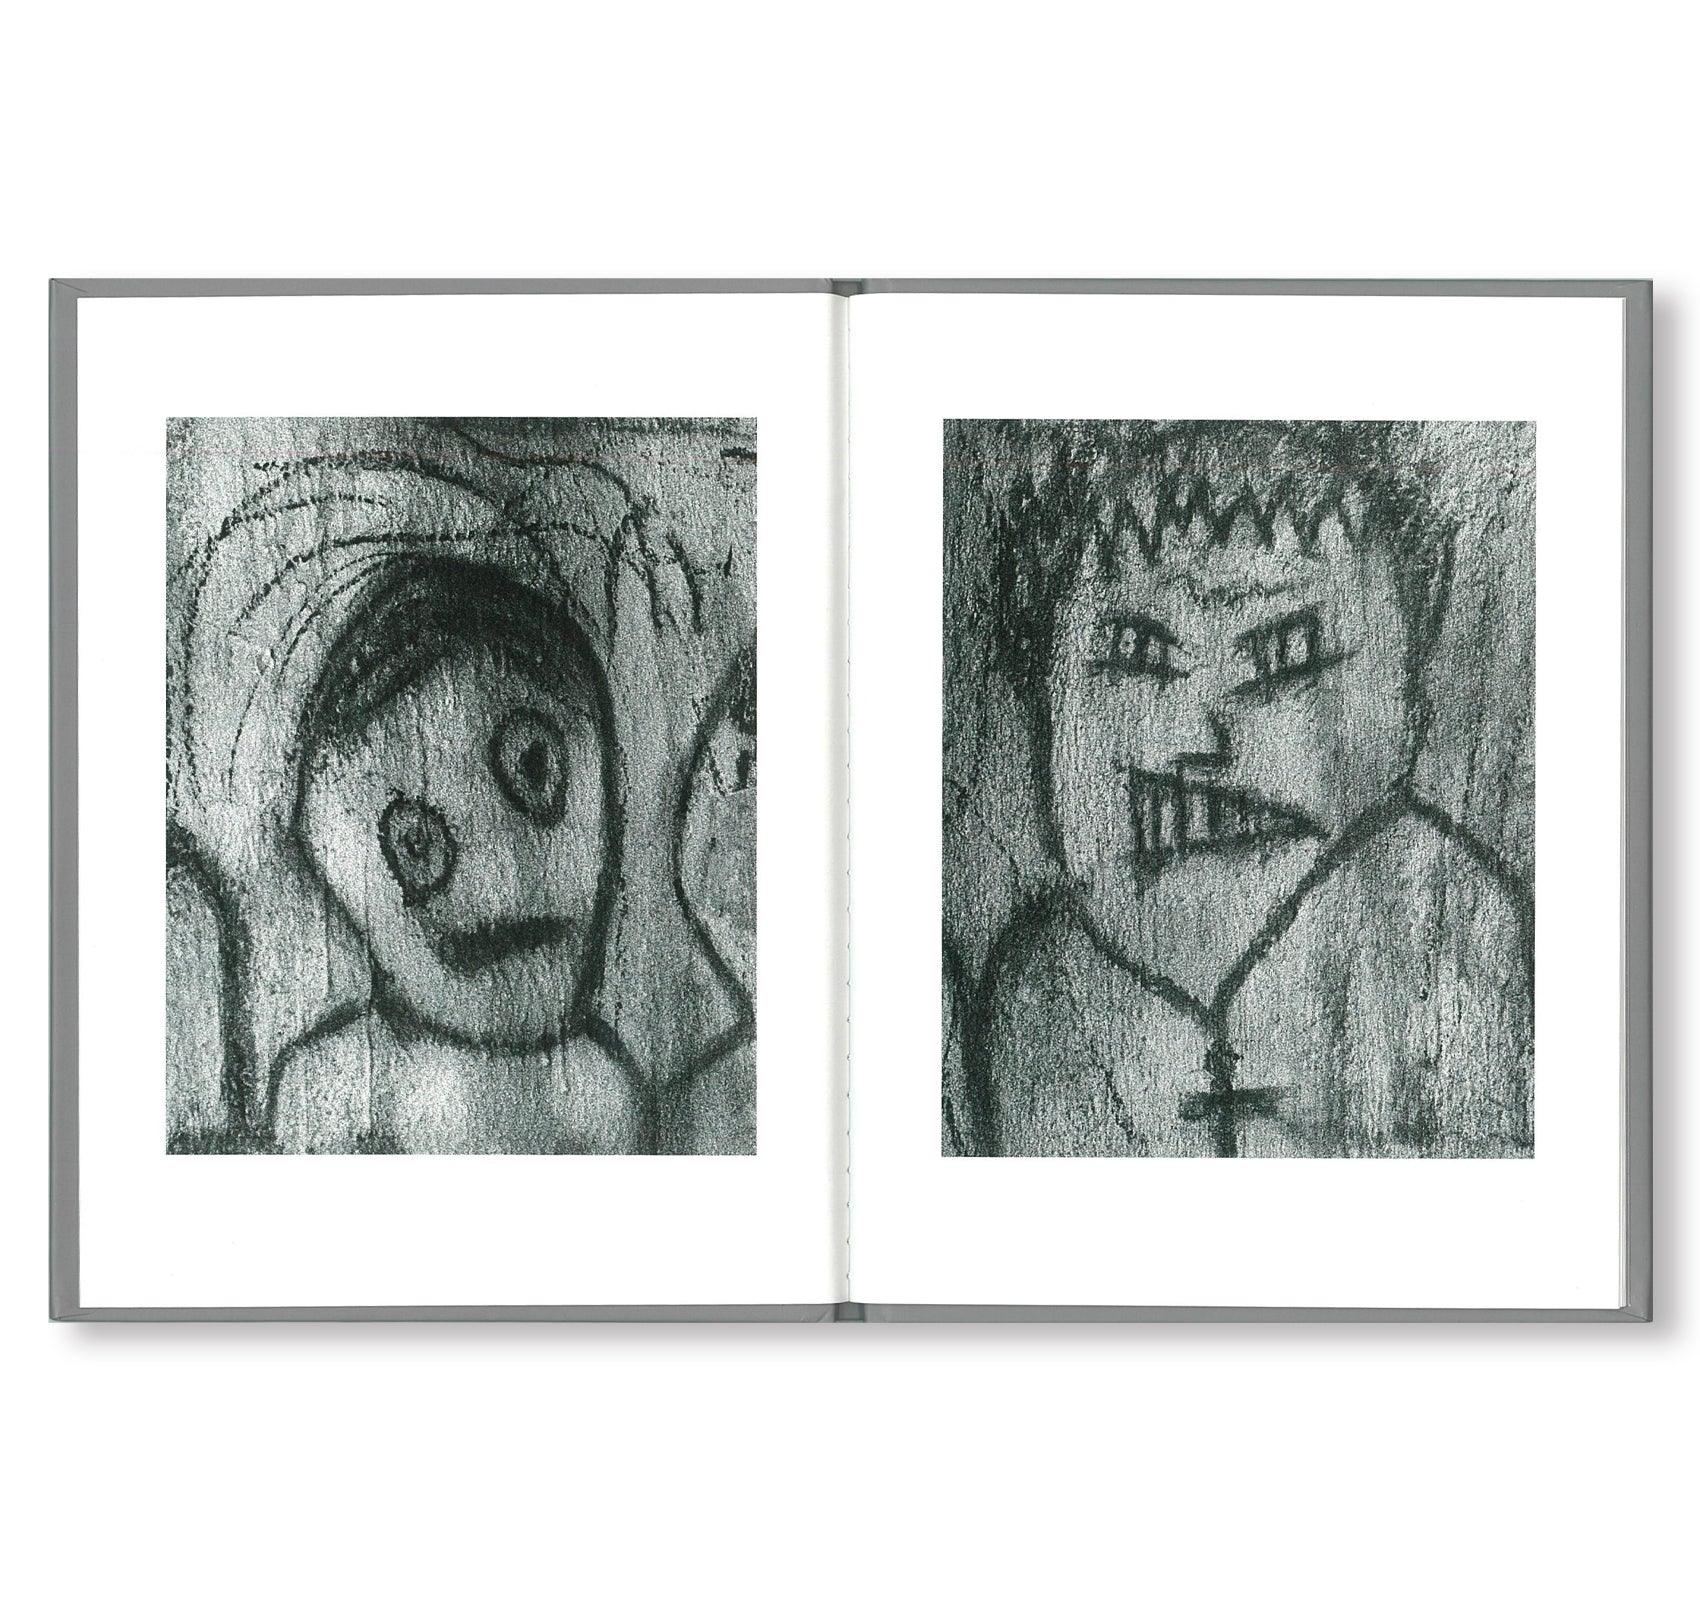 ONE PICTURE BOOK #85: THE AUDIENCE by Roger Ballen